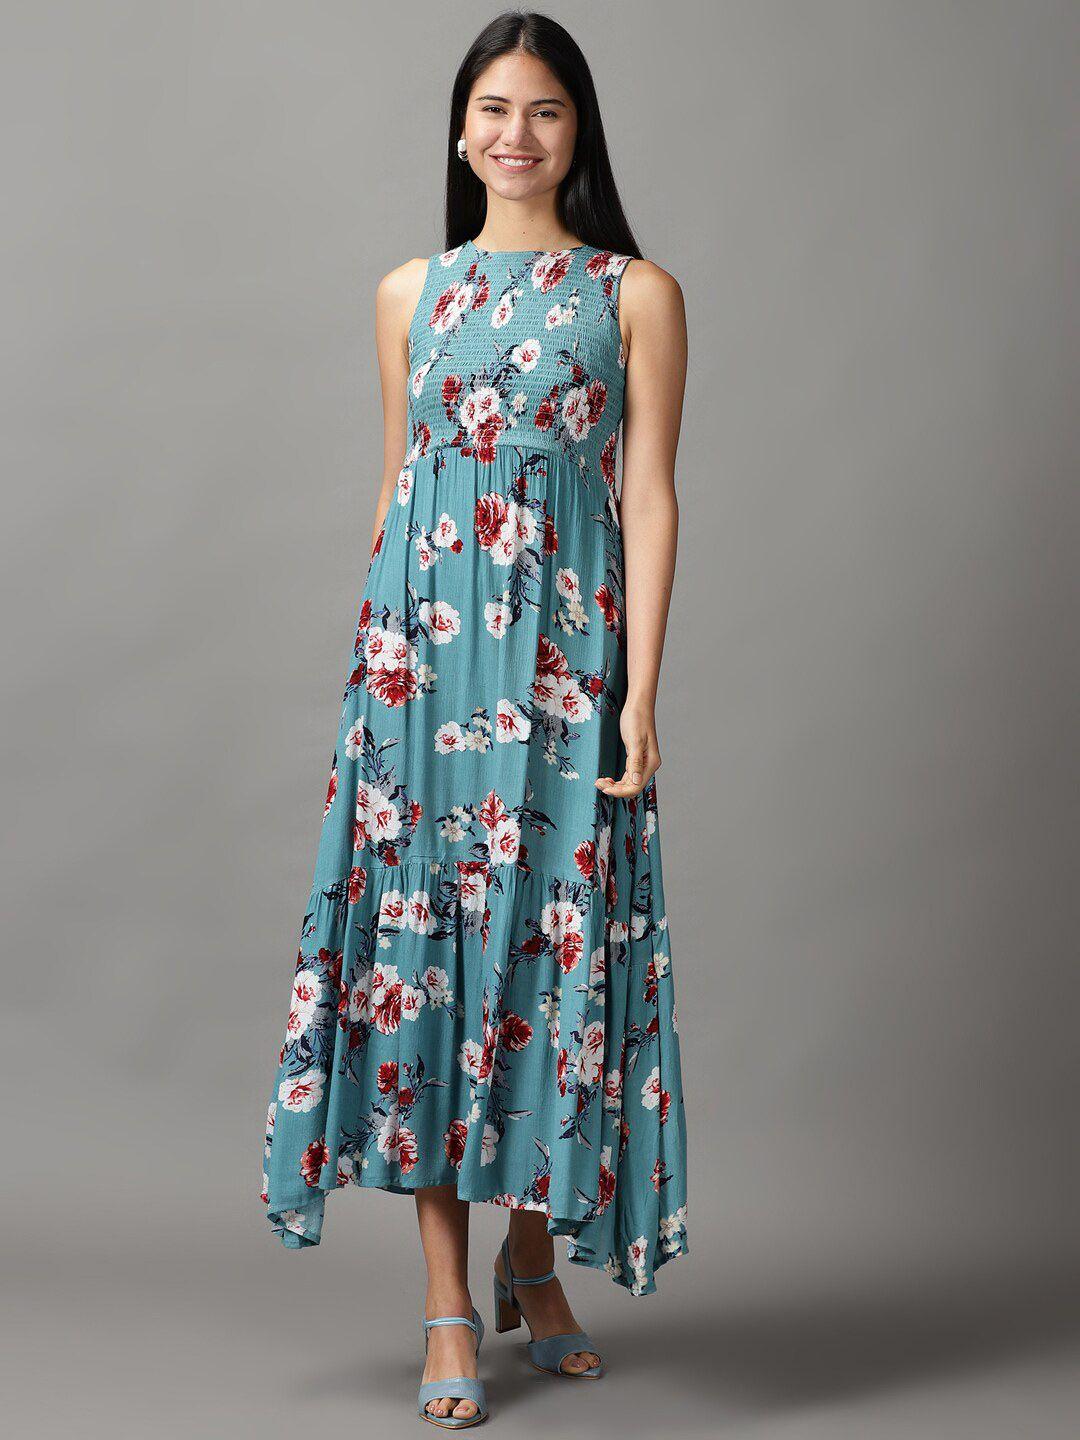 showoff-women-teal-&-white-floral-maxi-dress